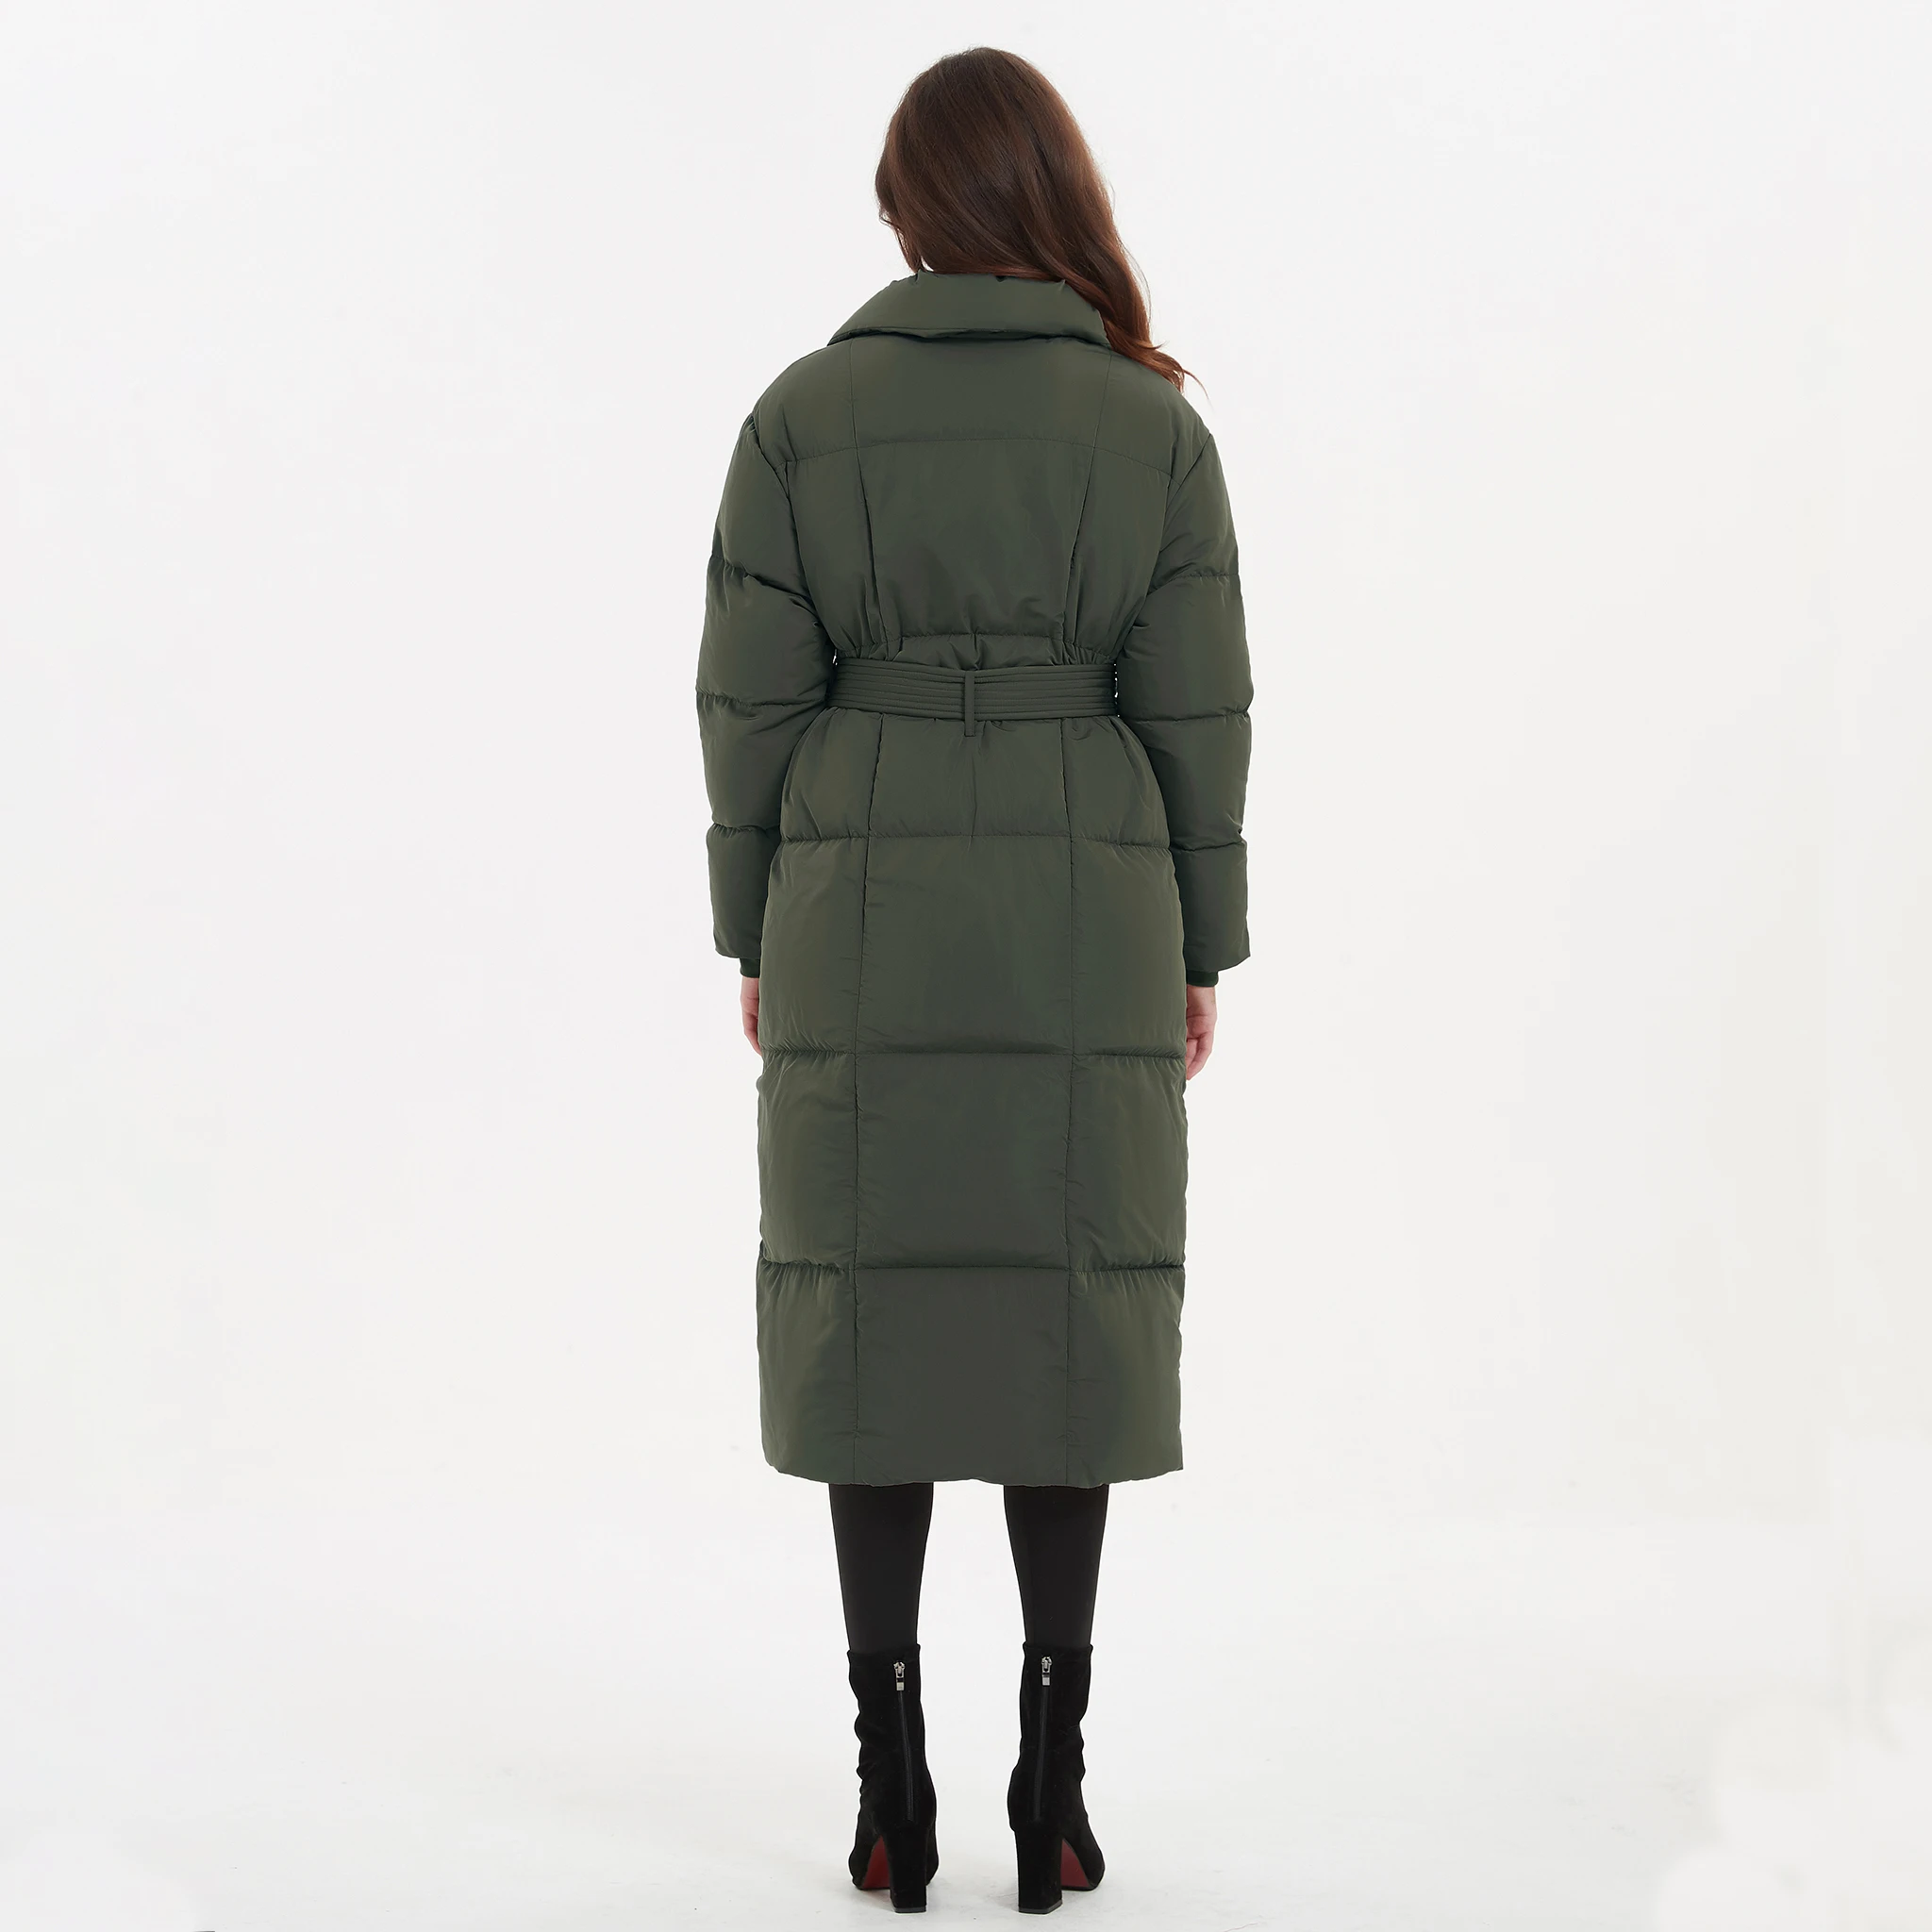 Malina Thick Loose Parkas Women Fashion Solid Covered Button Coats Women Elegant Tie Belt Long Cotton Jackets Female Ladies